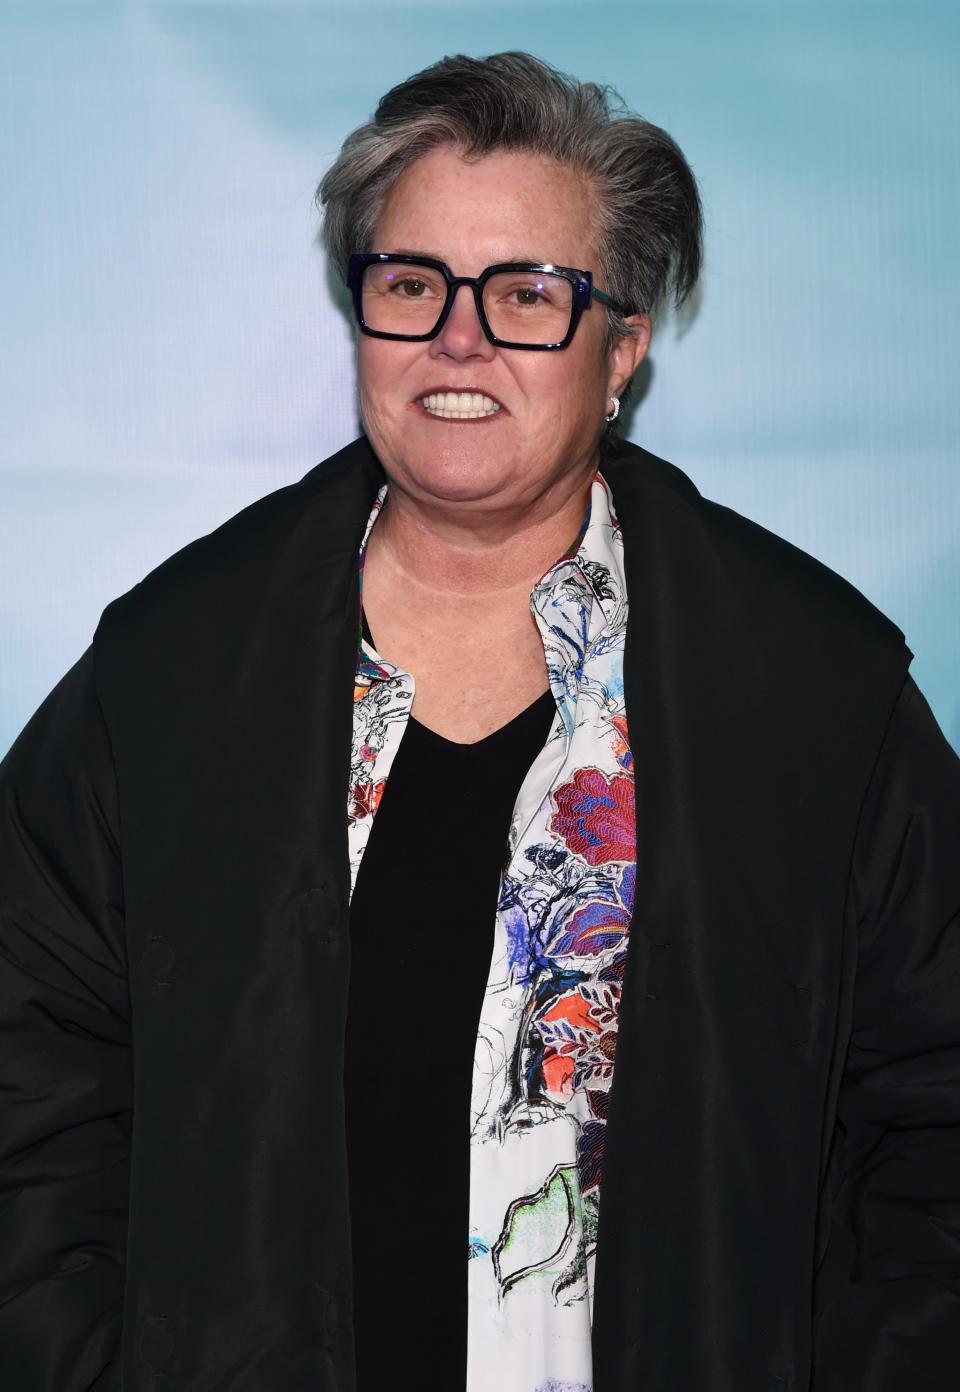 Rosie O'Donnell attends the opening night of the broadway show "Jagged Little Pill' at Broadhurst Theatre on December 05, 2019 in New York City.